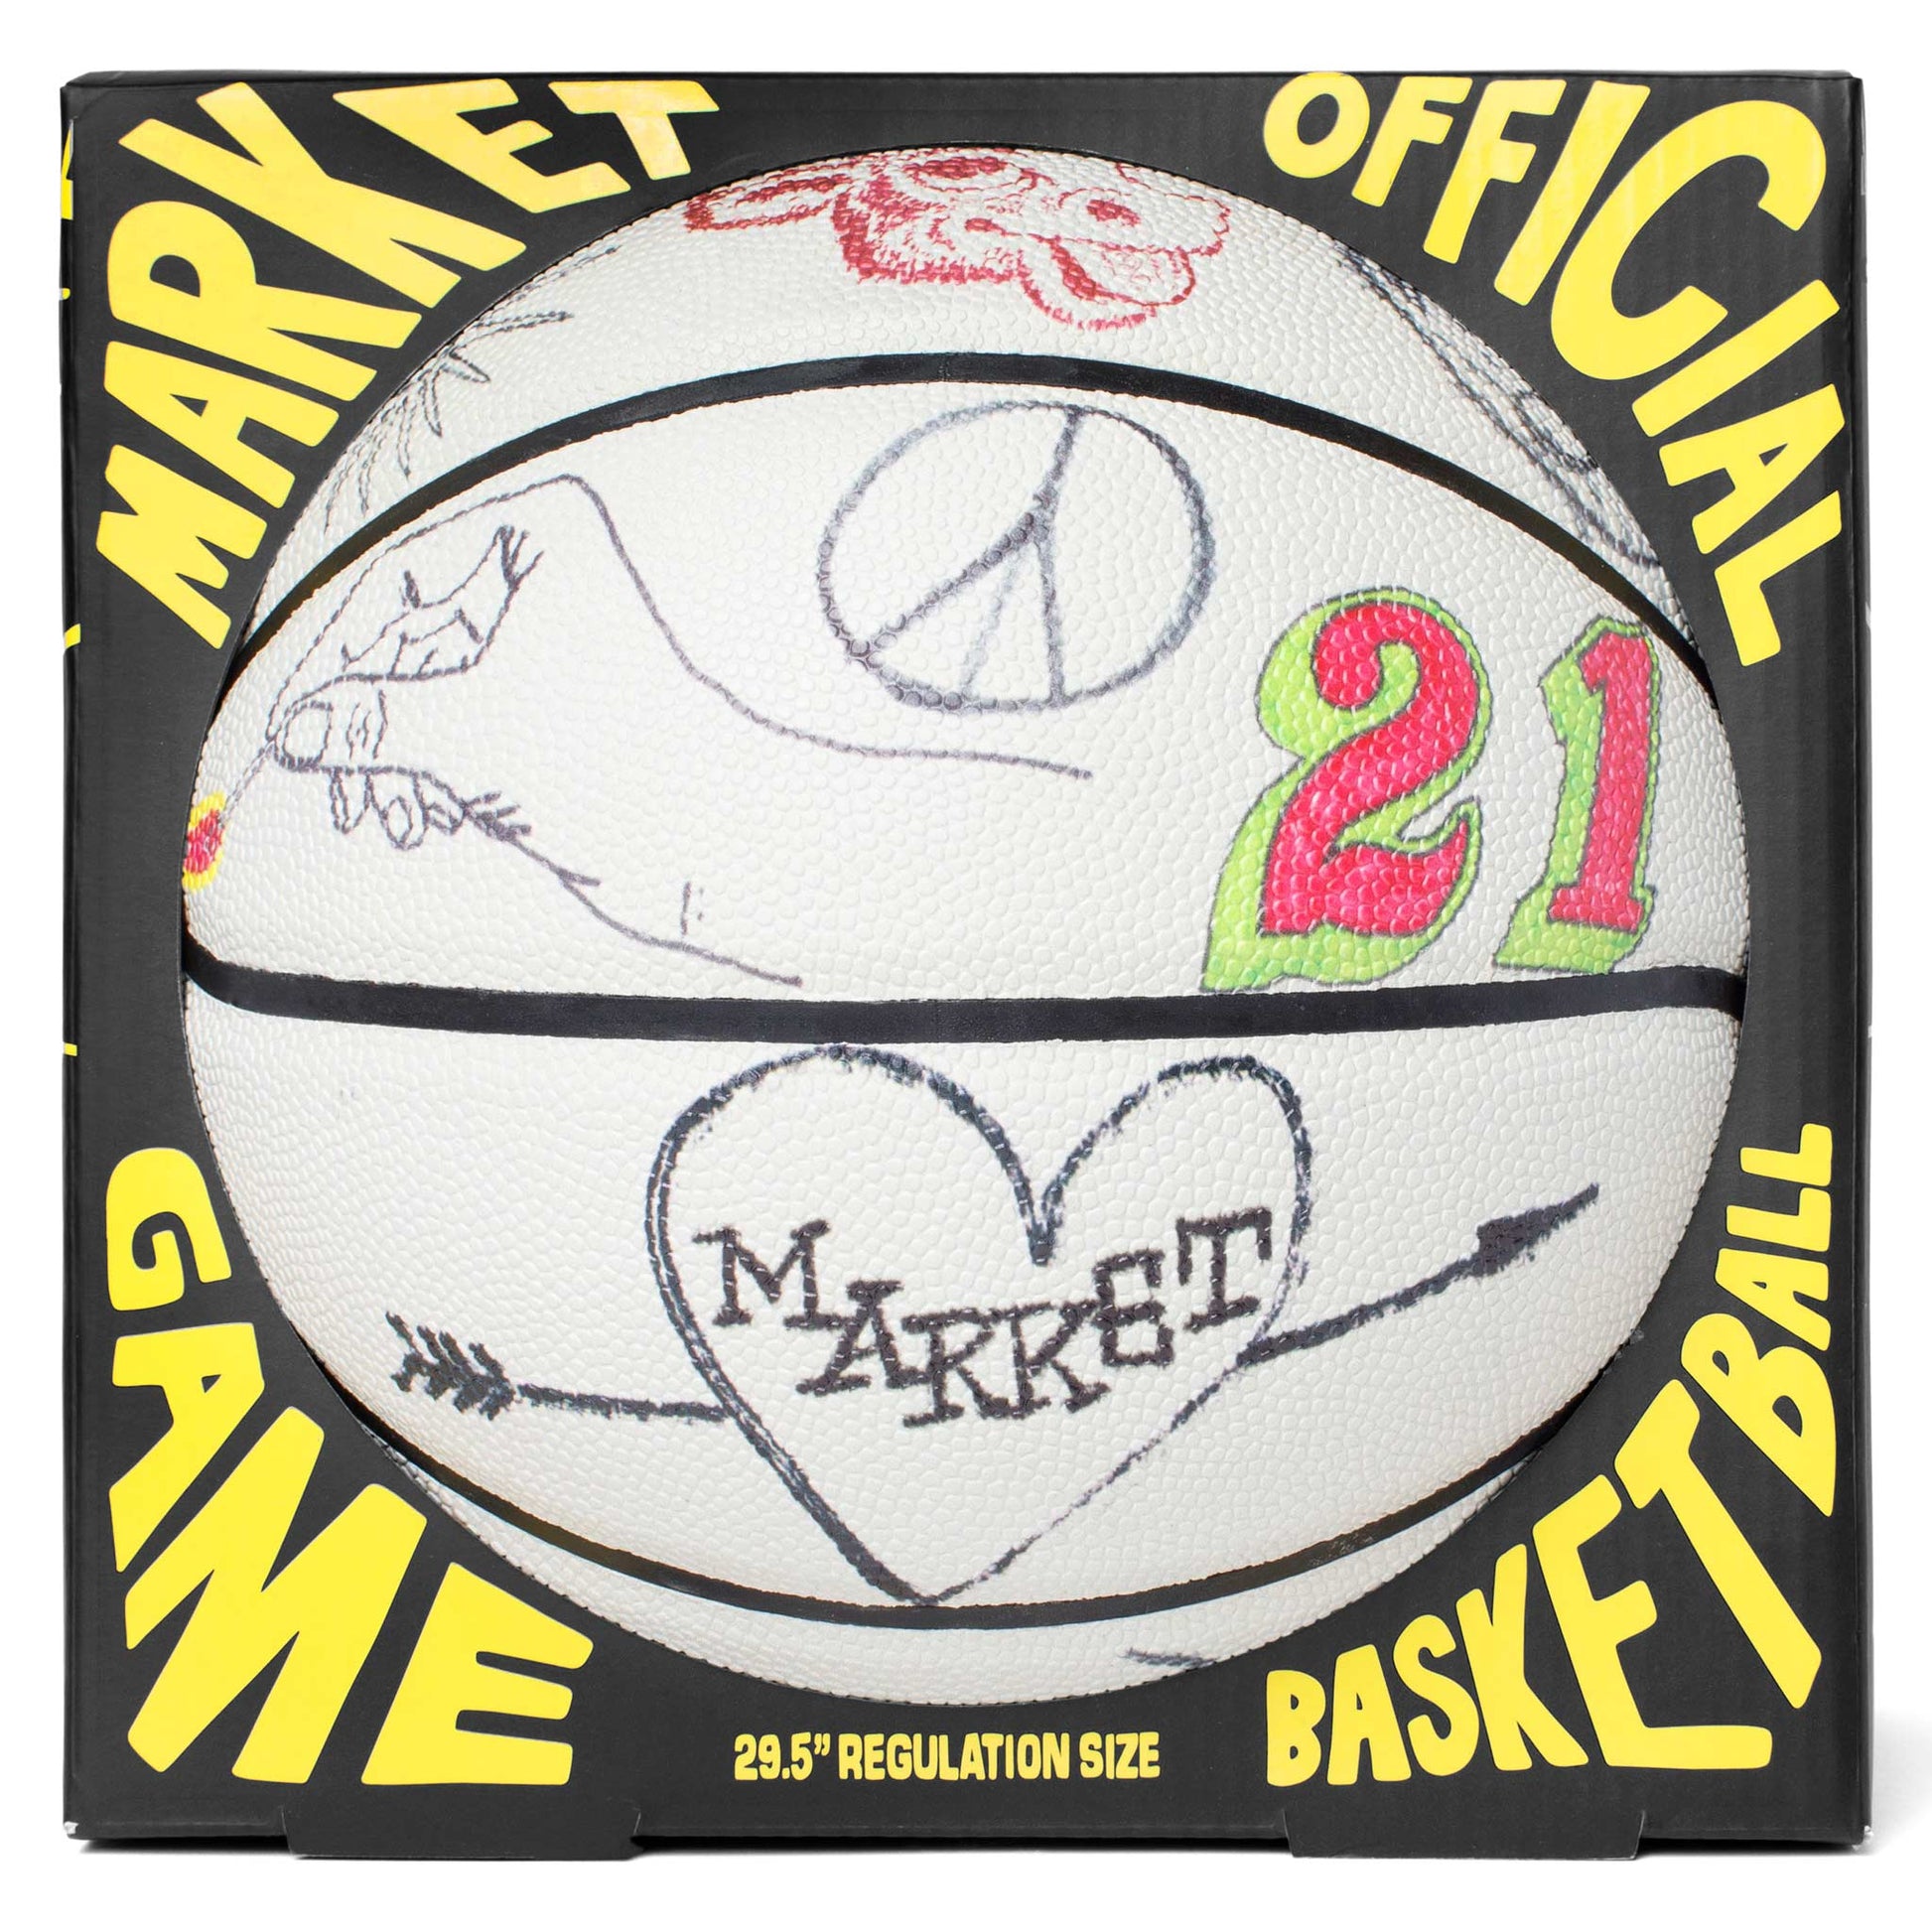 MARKET clothing brand VARSITY HAND-DRAWN BASKETBALL. Find more basketballs, sporting goods, homegoods and graphic tees at MarketStudios.com. Formally Chinatown Market. 